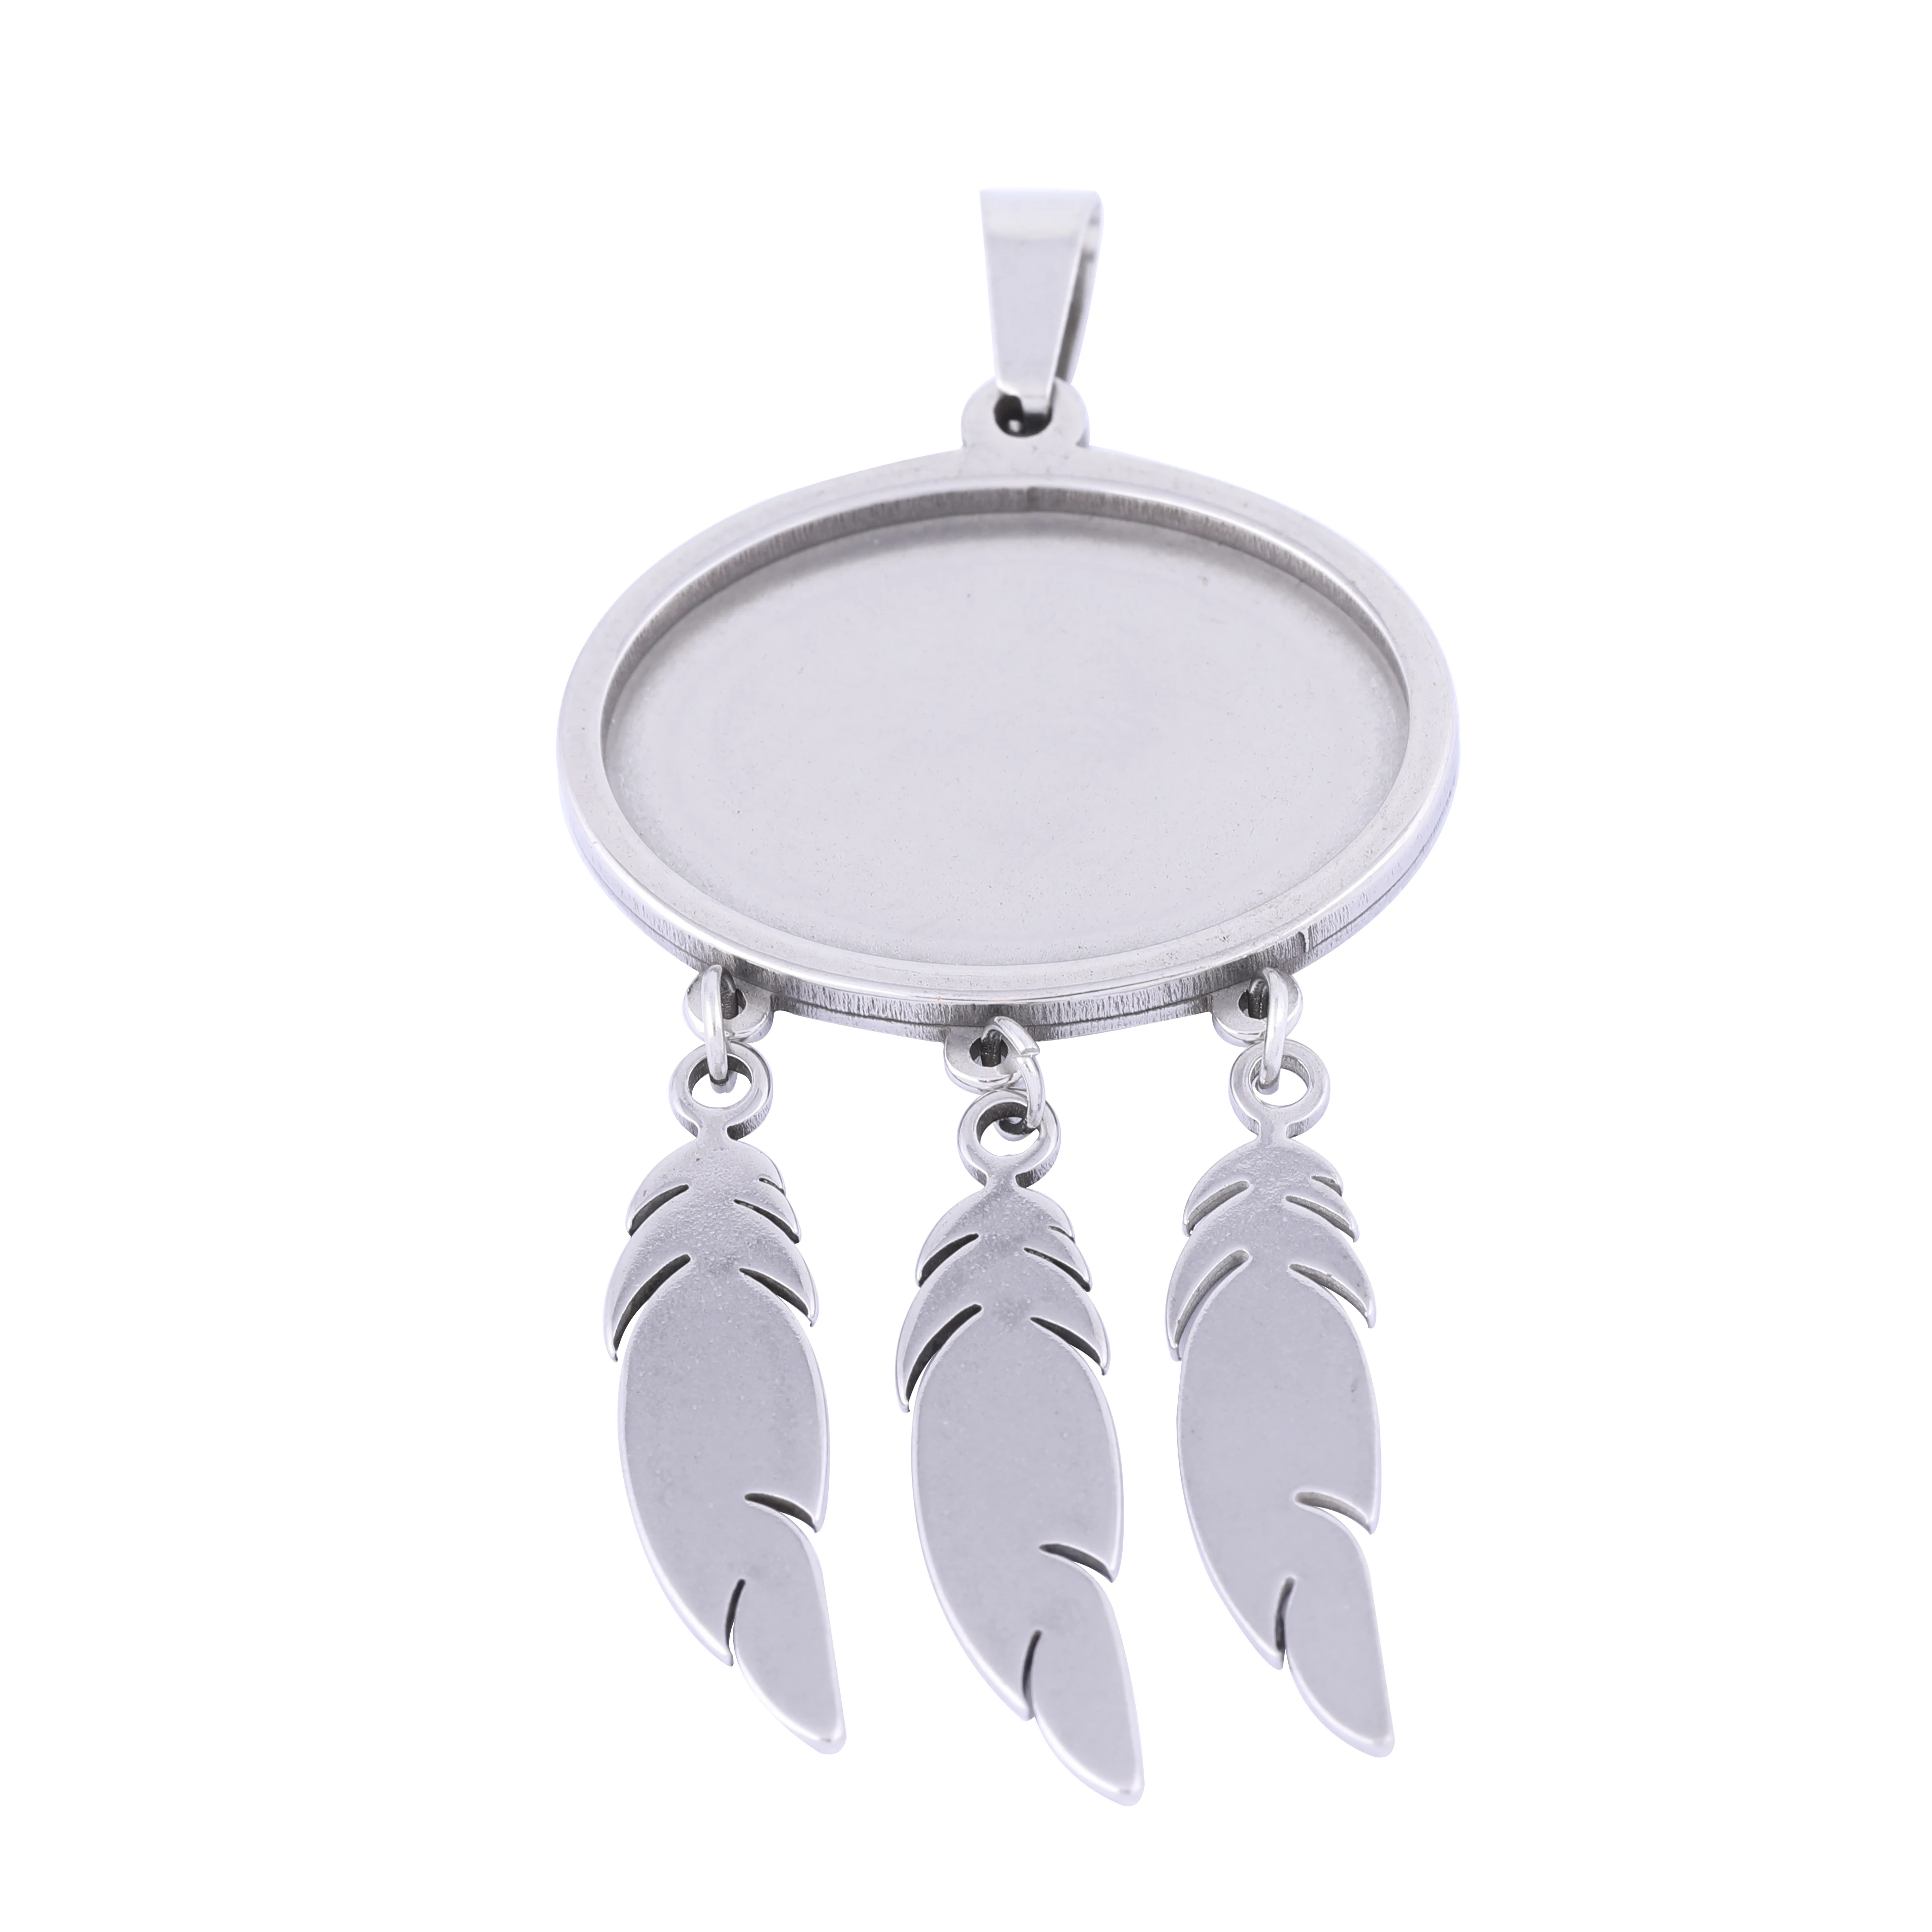 

Onwear 3pcs Stainless Steel 18x25mm Oval Feather charm Cabochon Pendant Base Setting Blanks Diy Keychain Necklace Bezel Trays